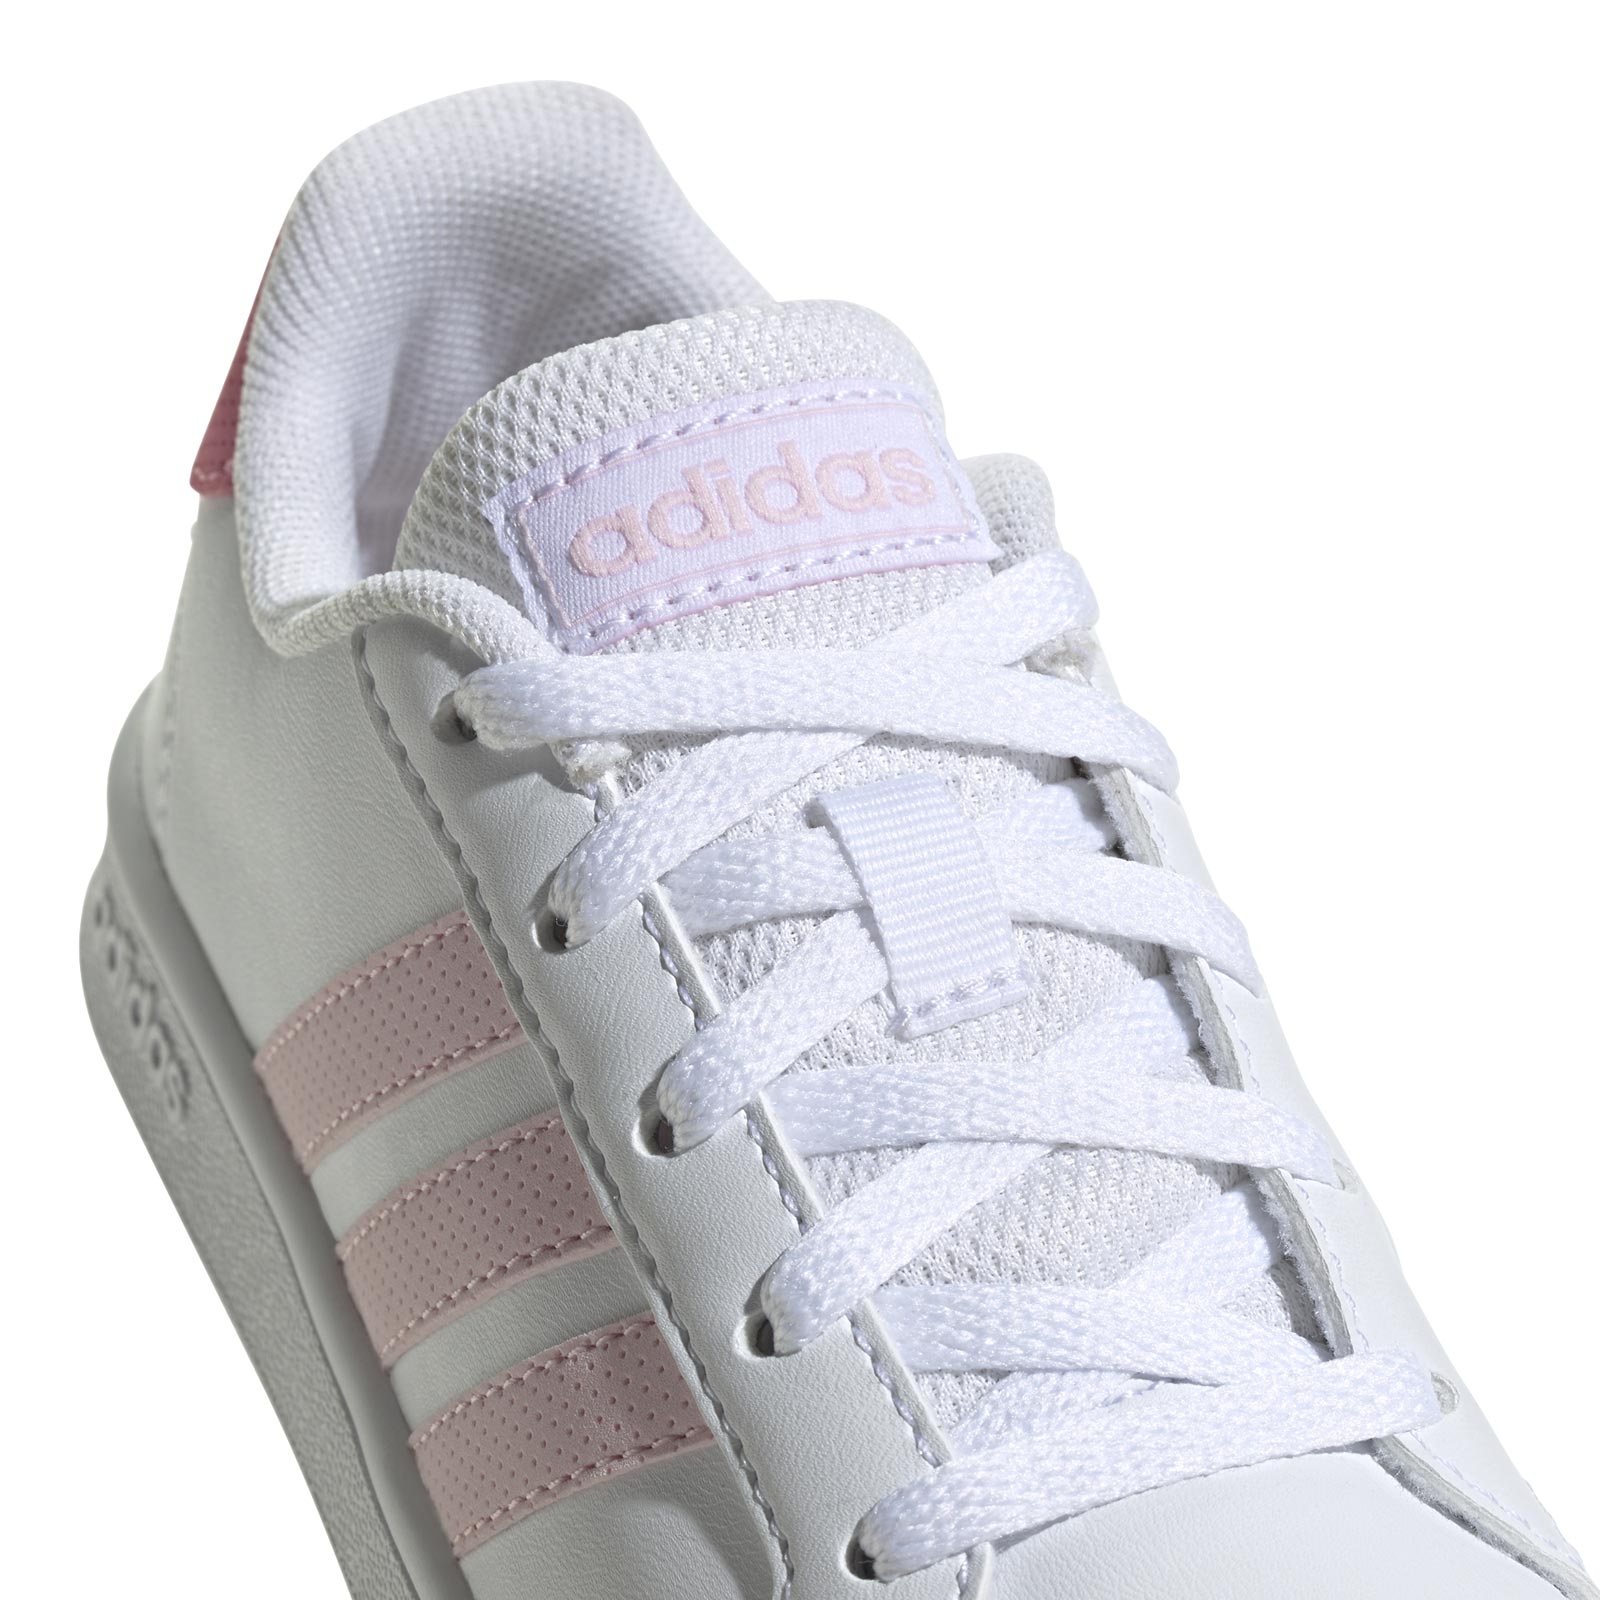 adidas GRAND COURT Girls Shoes